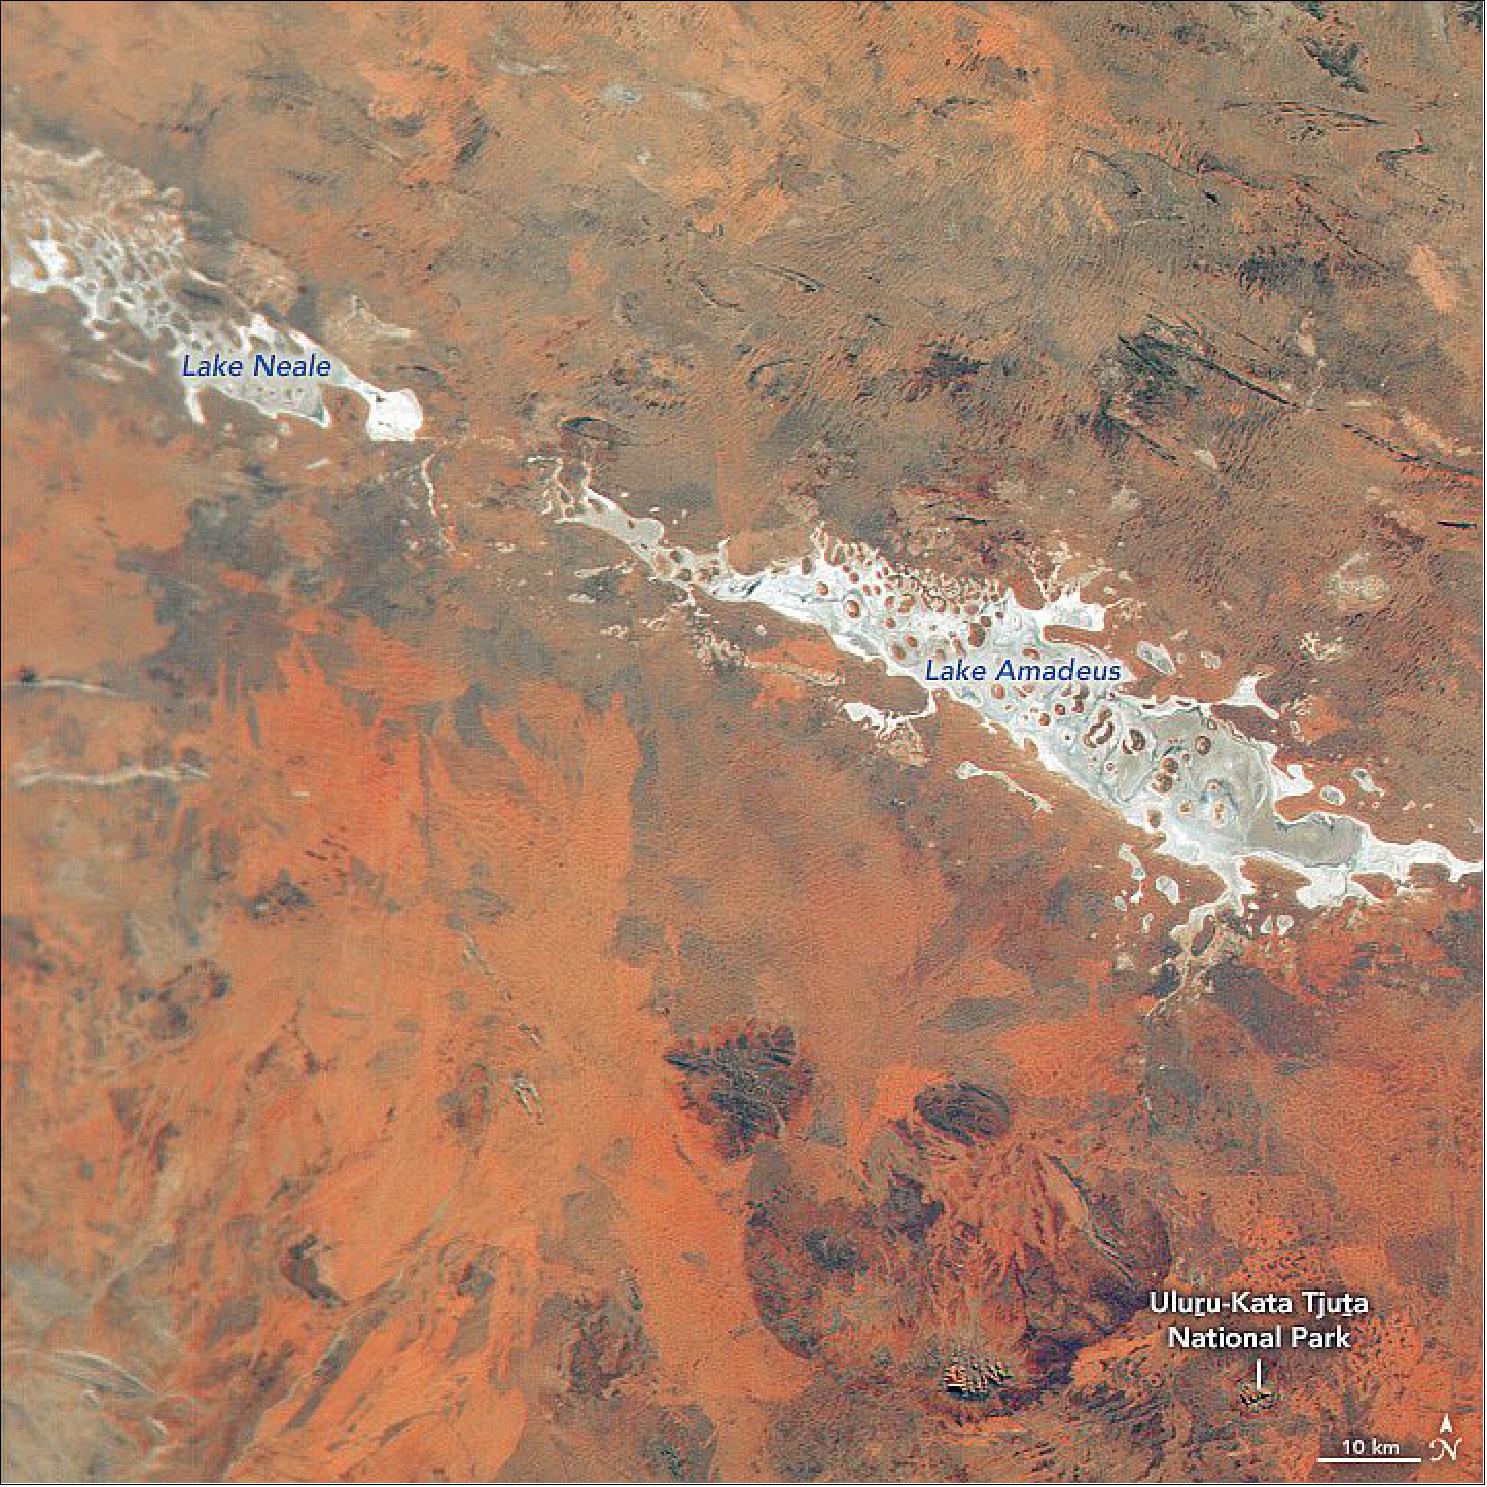 Figure 13: Soils in the center of the continent—including those around the famous rock formations of Uluru and Kata-Tjuta—come in striking shades of red. The HawkEye image of the SeaHawk mission (observed on 20 June 2021) highlights the vivid red deserts around Australia's Uluru and Kata-Tjuta famous rock formations in the southern part of Northern Territory. The white salt pan of Lake Amadeus lies just to the north, as well as Lake Neale. They are part of a line of salt lakes that stretch hundreds of kilometers from Lake Hopkins in the west to the Finke River in the east (image credit: NASA image by Alan Holmes/NASA's Ocean Color Web, using data from SeaHawk/HawkEye. Story by Adam Voiland)